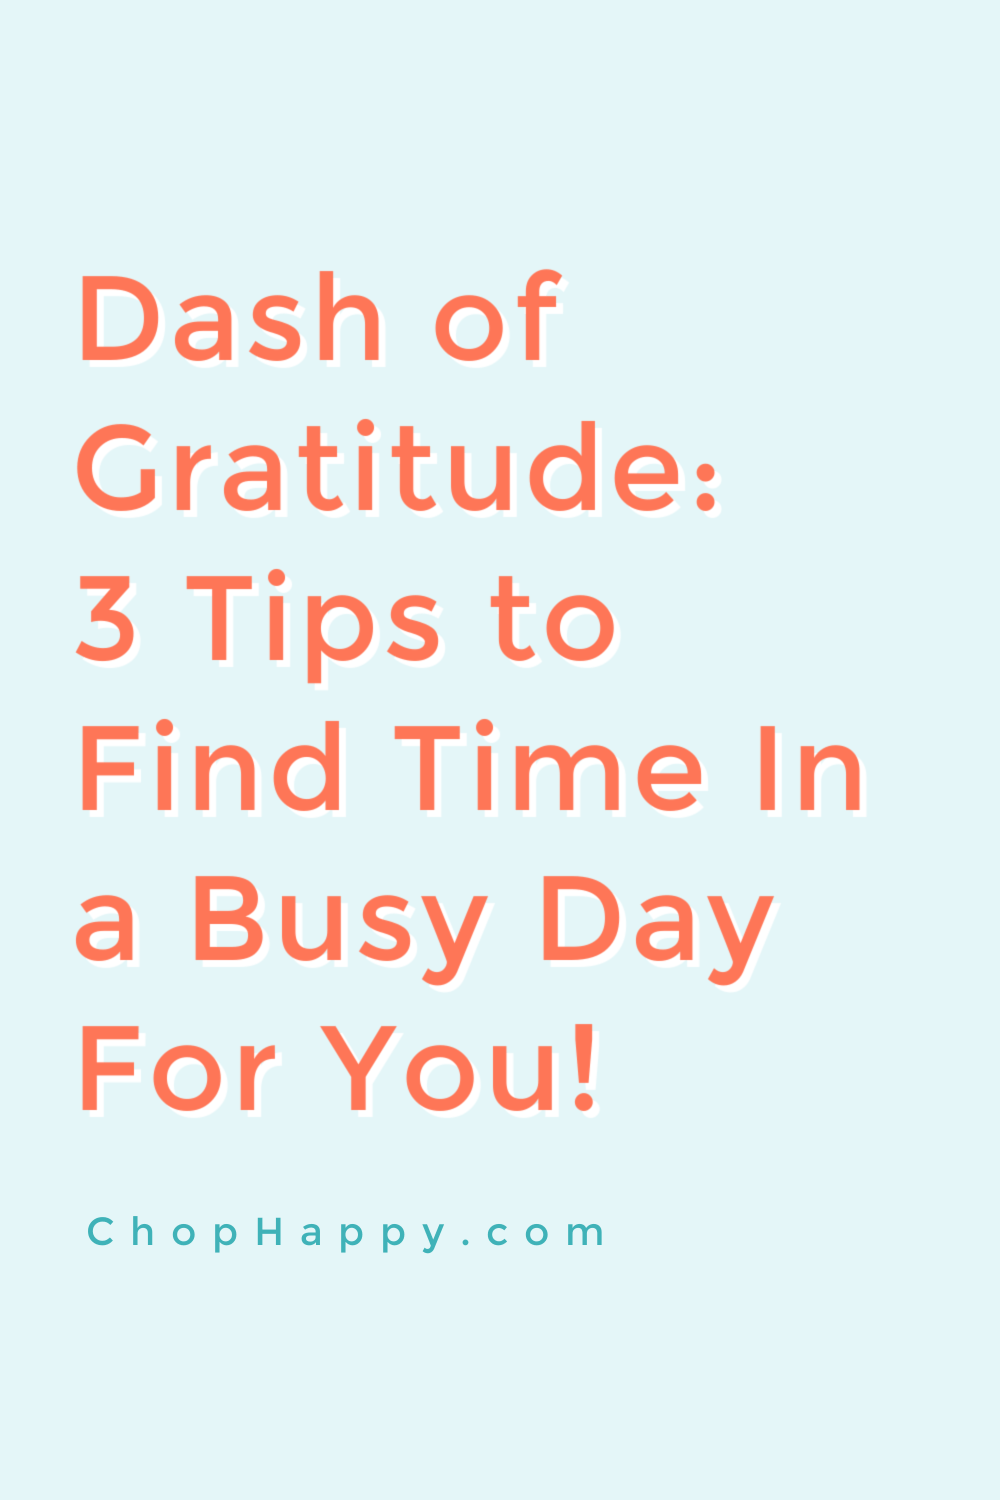 Dash of Gratitude: 3 Tips to Find Time In a Busy Day For You! www.ChopHappy.com #lawofattraction #attitudeofgratitude